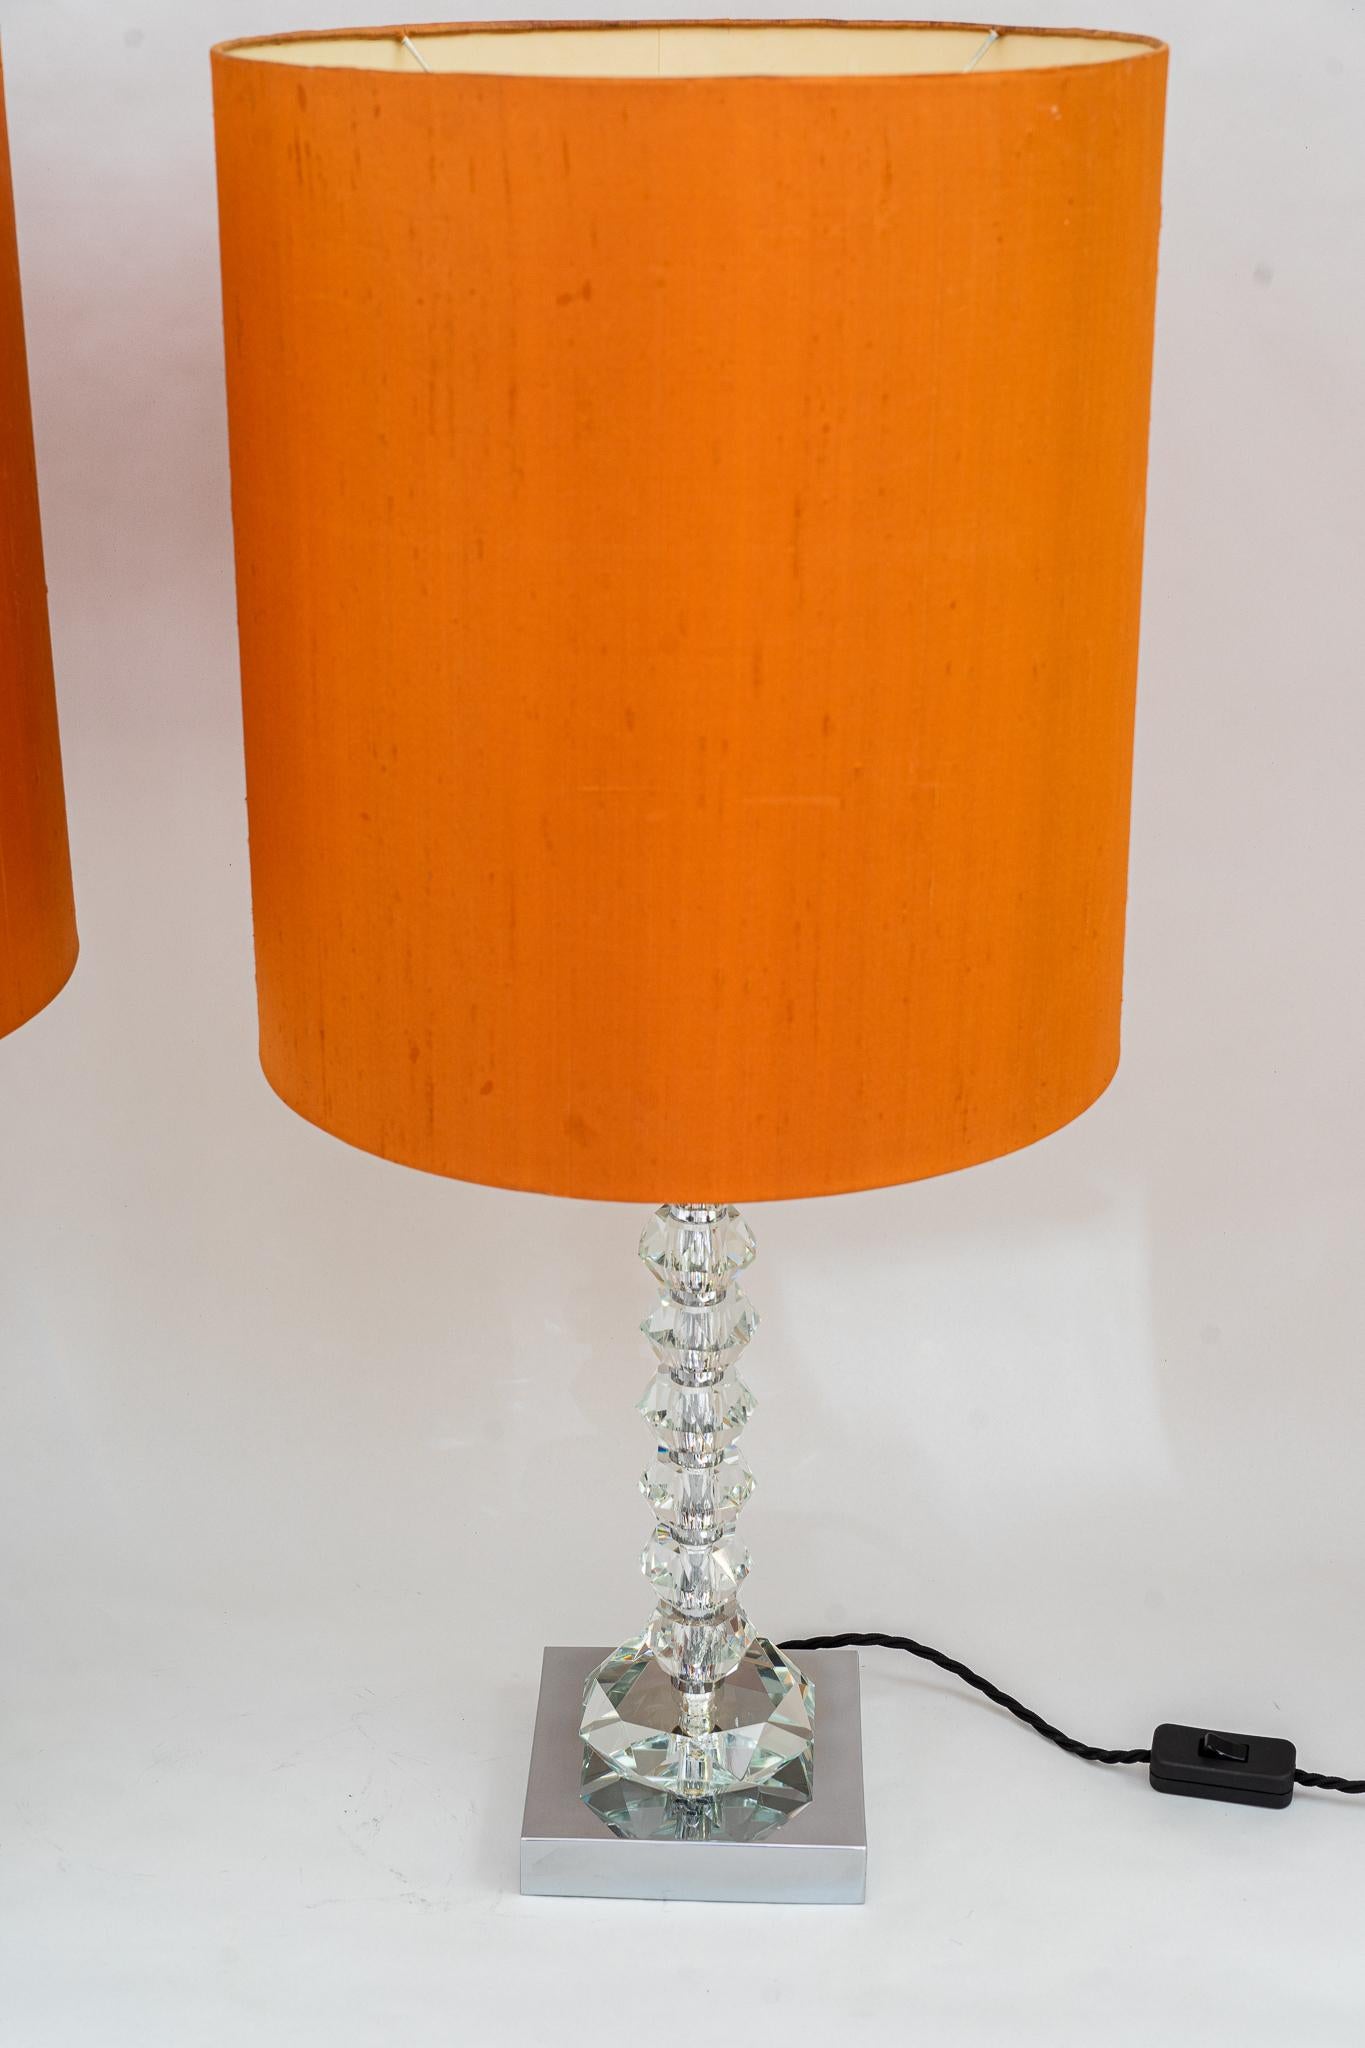 Two Bakalowits table lamps with huge faceted diamond crystals, Austria, 1970s.
Two beautiful table or side lamp bases, executed in the 1970s by Bakalowits & Söhne, Austria. The lamps have square nickel-plated bases, are very solid and have huge